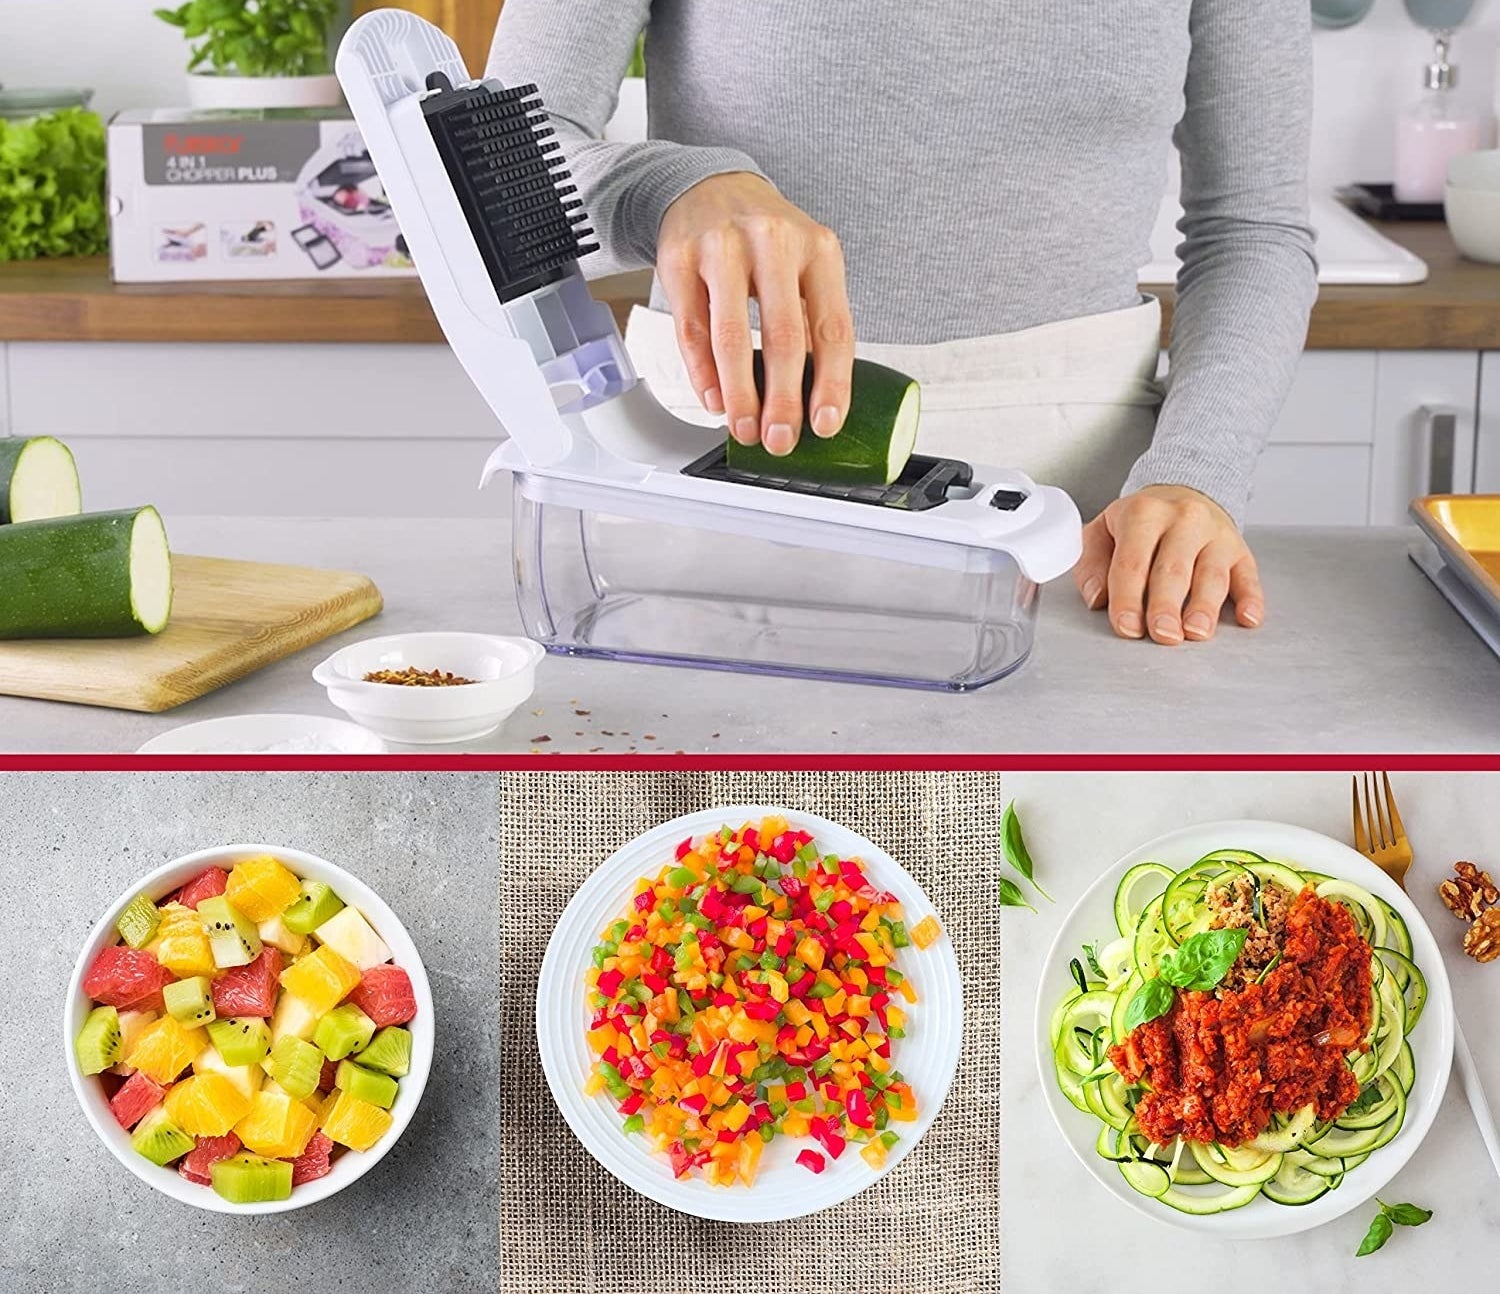 A person chopping veggies with the contraption